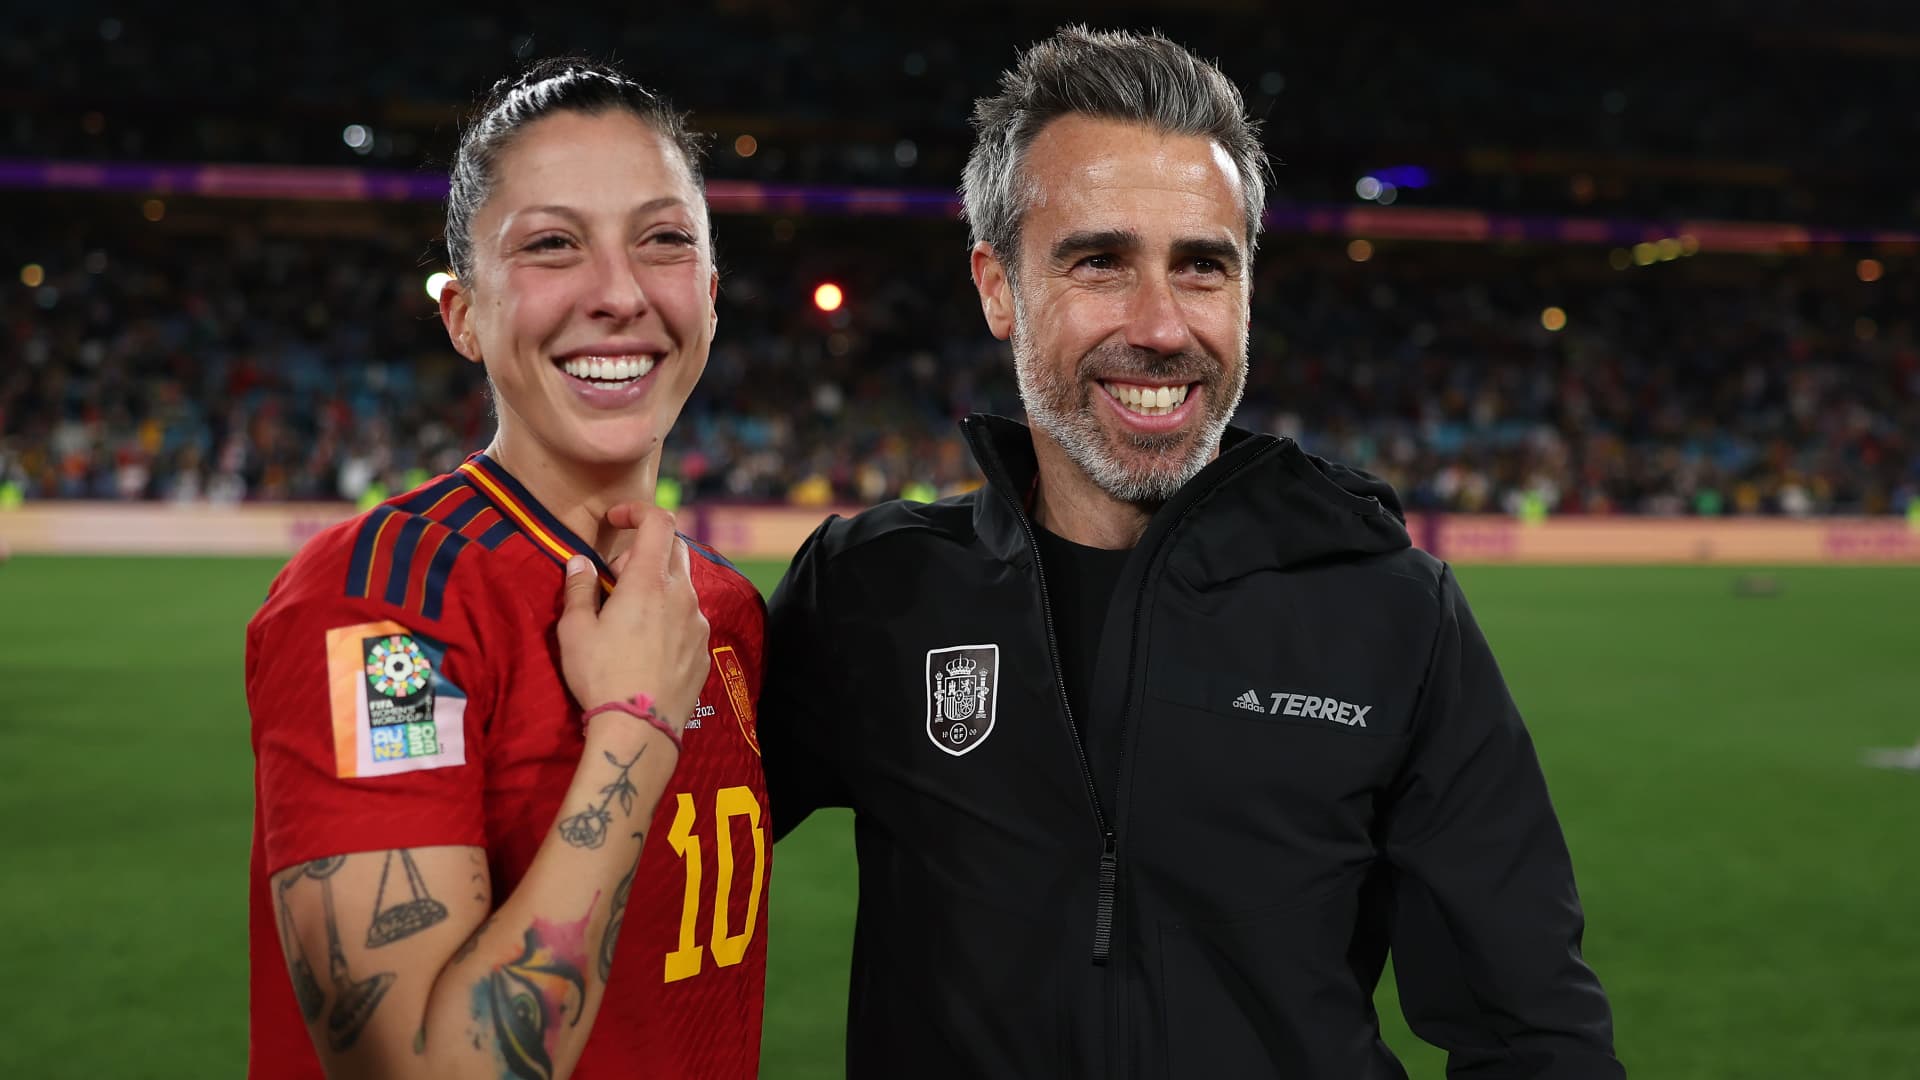 Spain fire Vilda as women’s team coach, name assistant as replacement